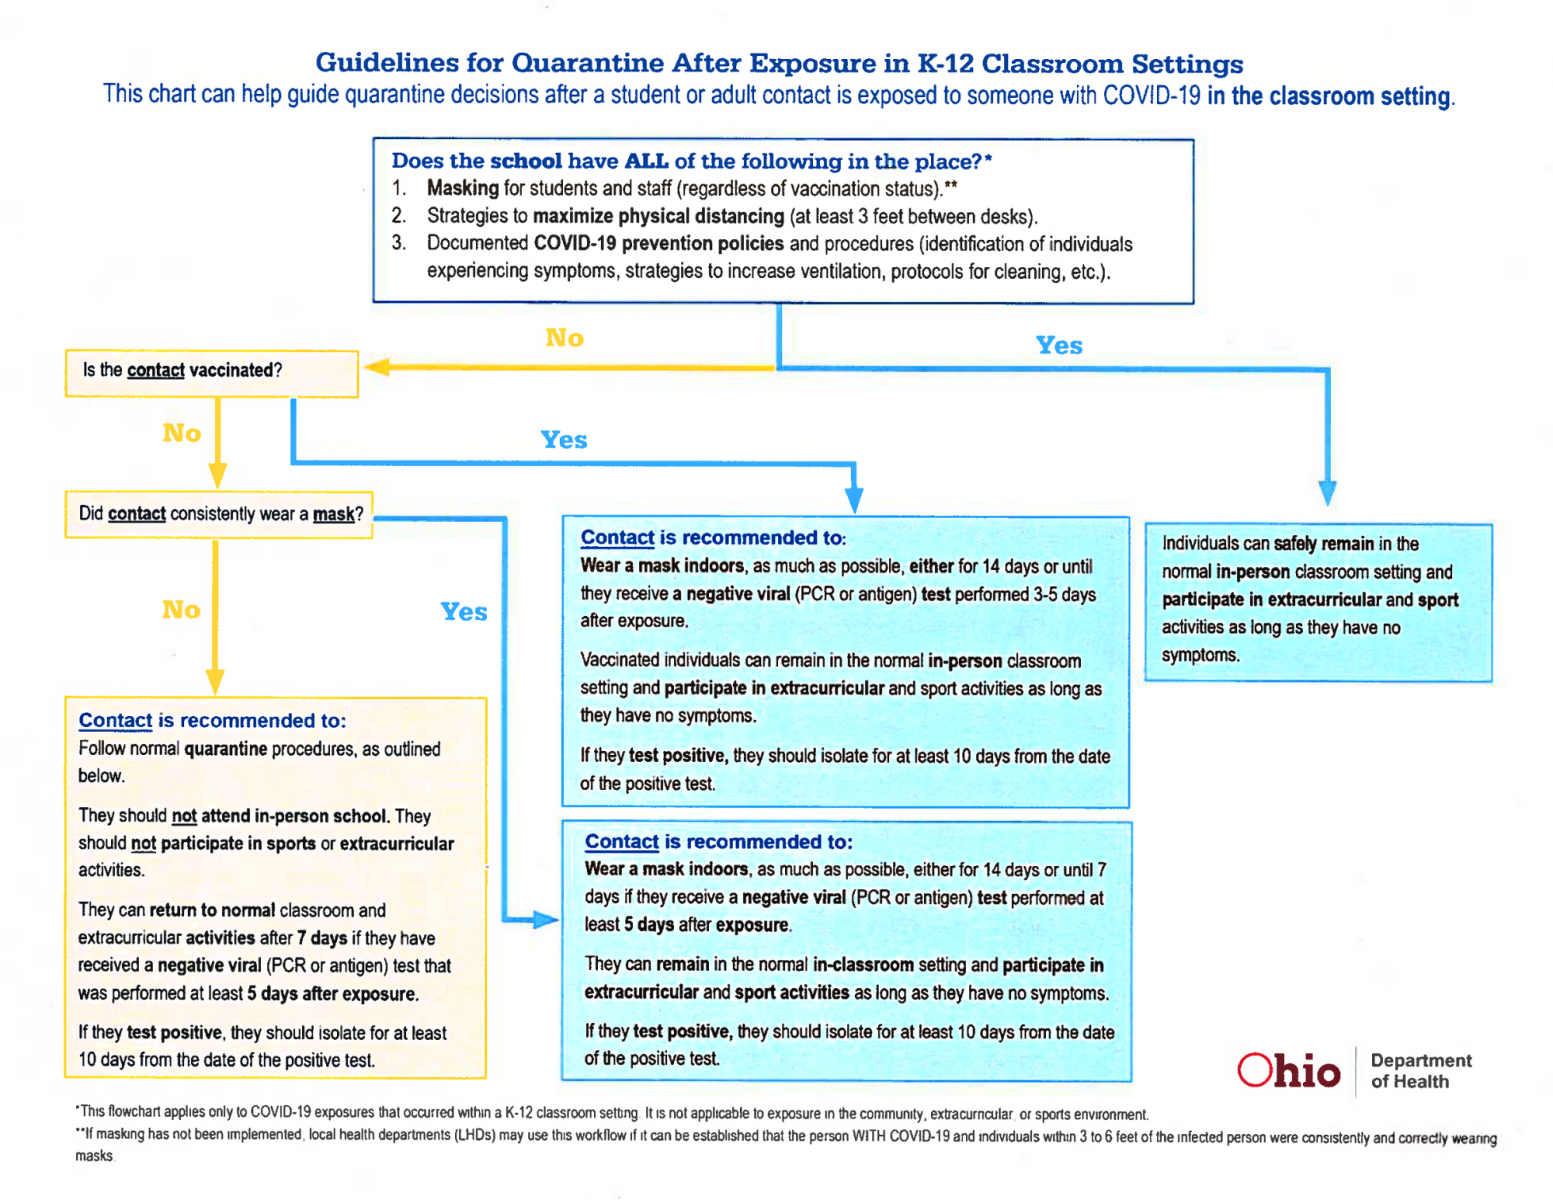 A flow chart titled: "Guidelines for Quarantine After Exposure in K-12 Classroom Setting." Information in the flow chart can be accessed in the .pdf link below.